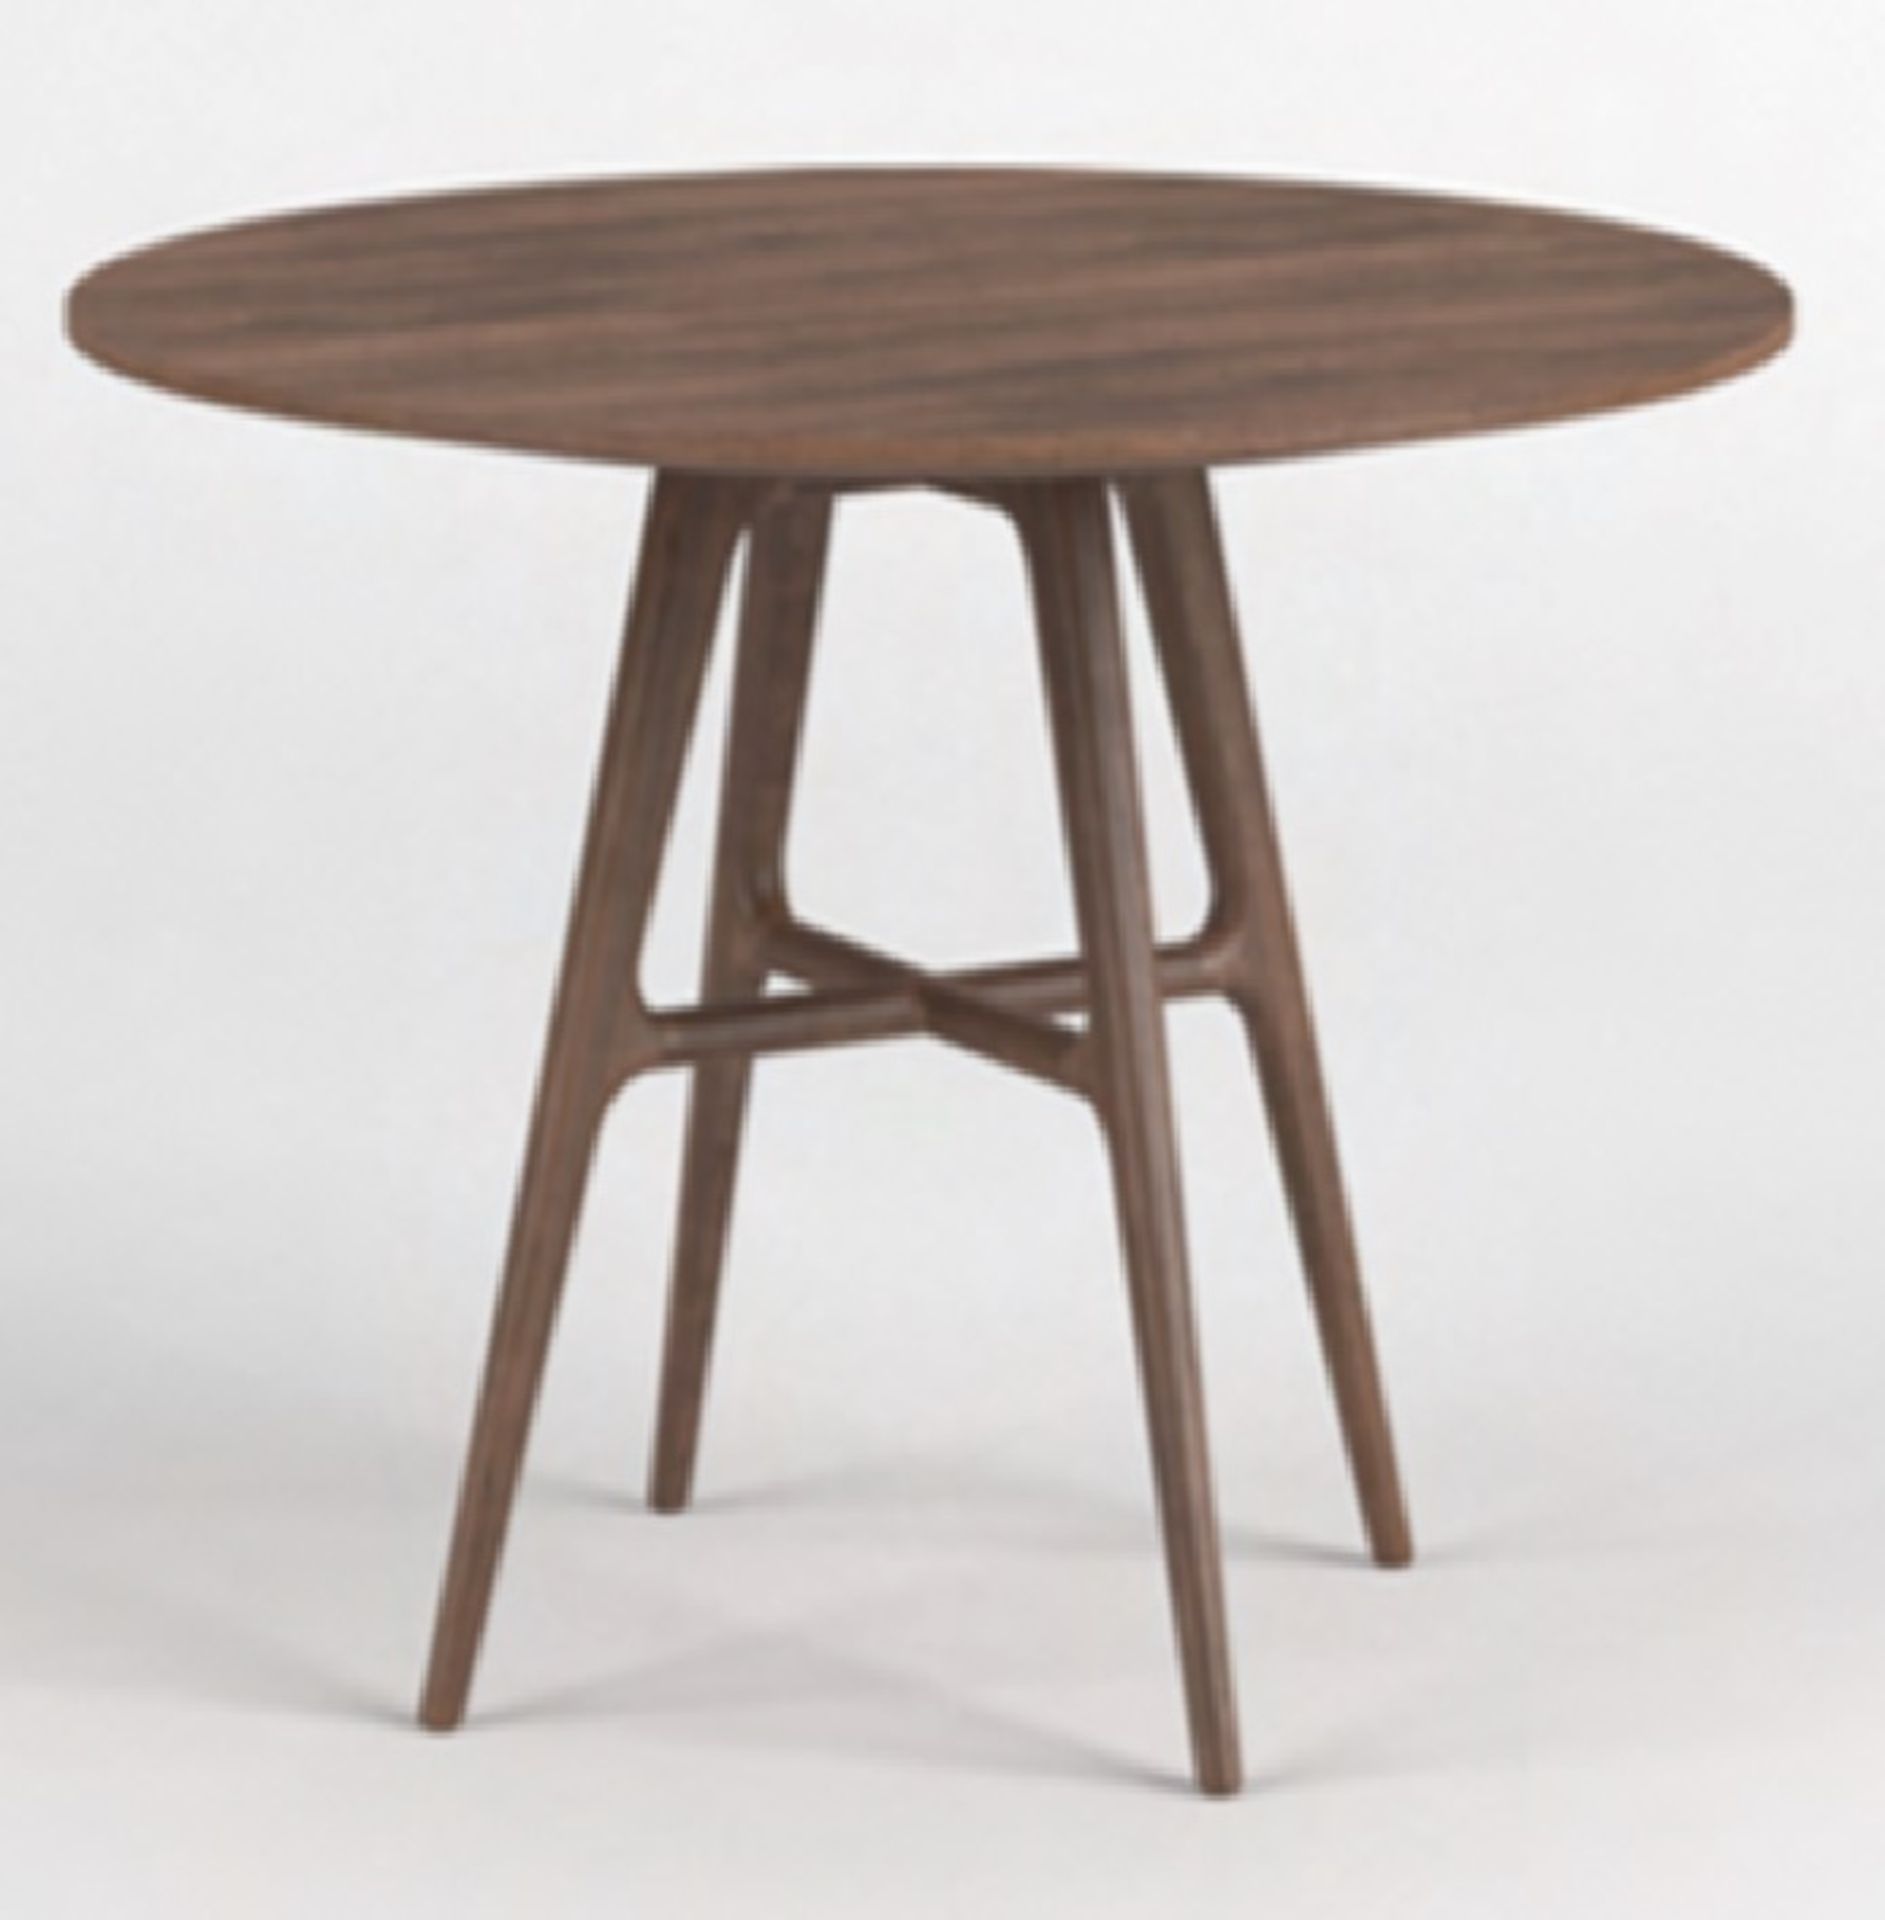 Asher Circular Dining Table A contemporary design with a traditional touch, the Asher Black American